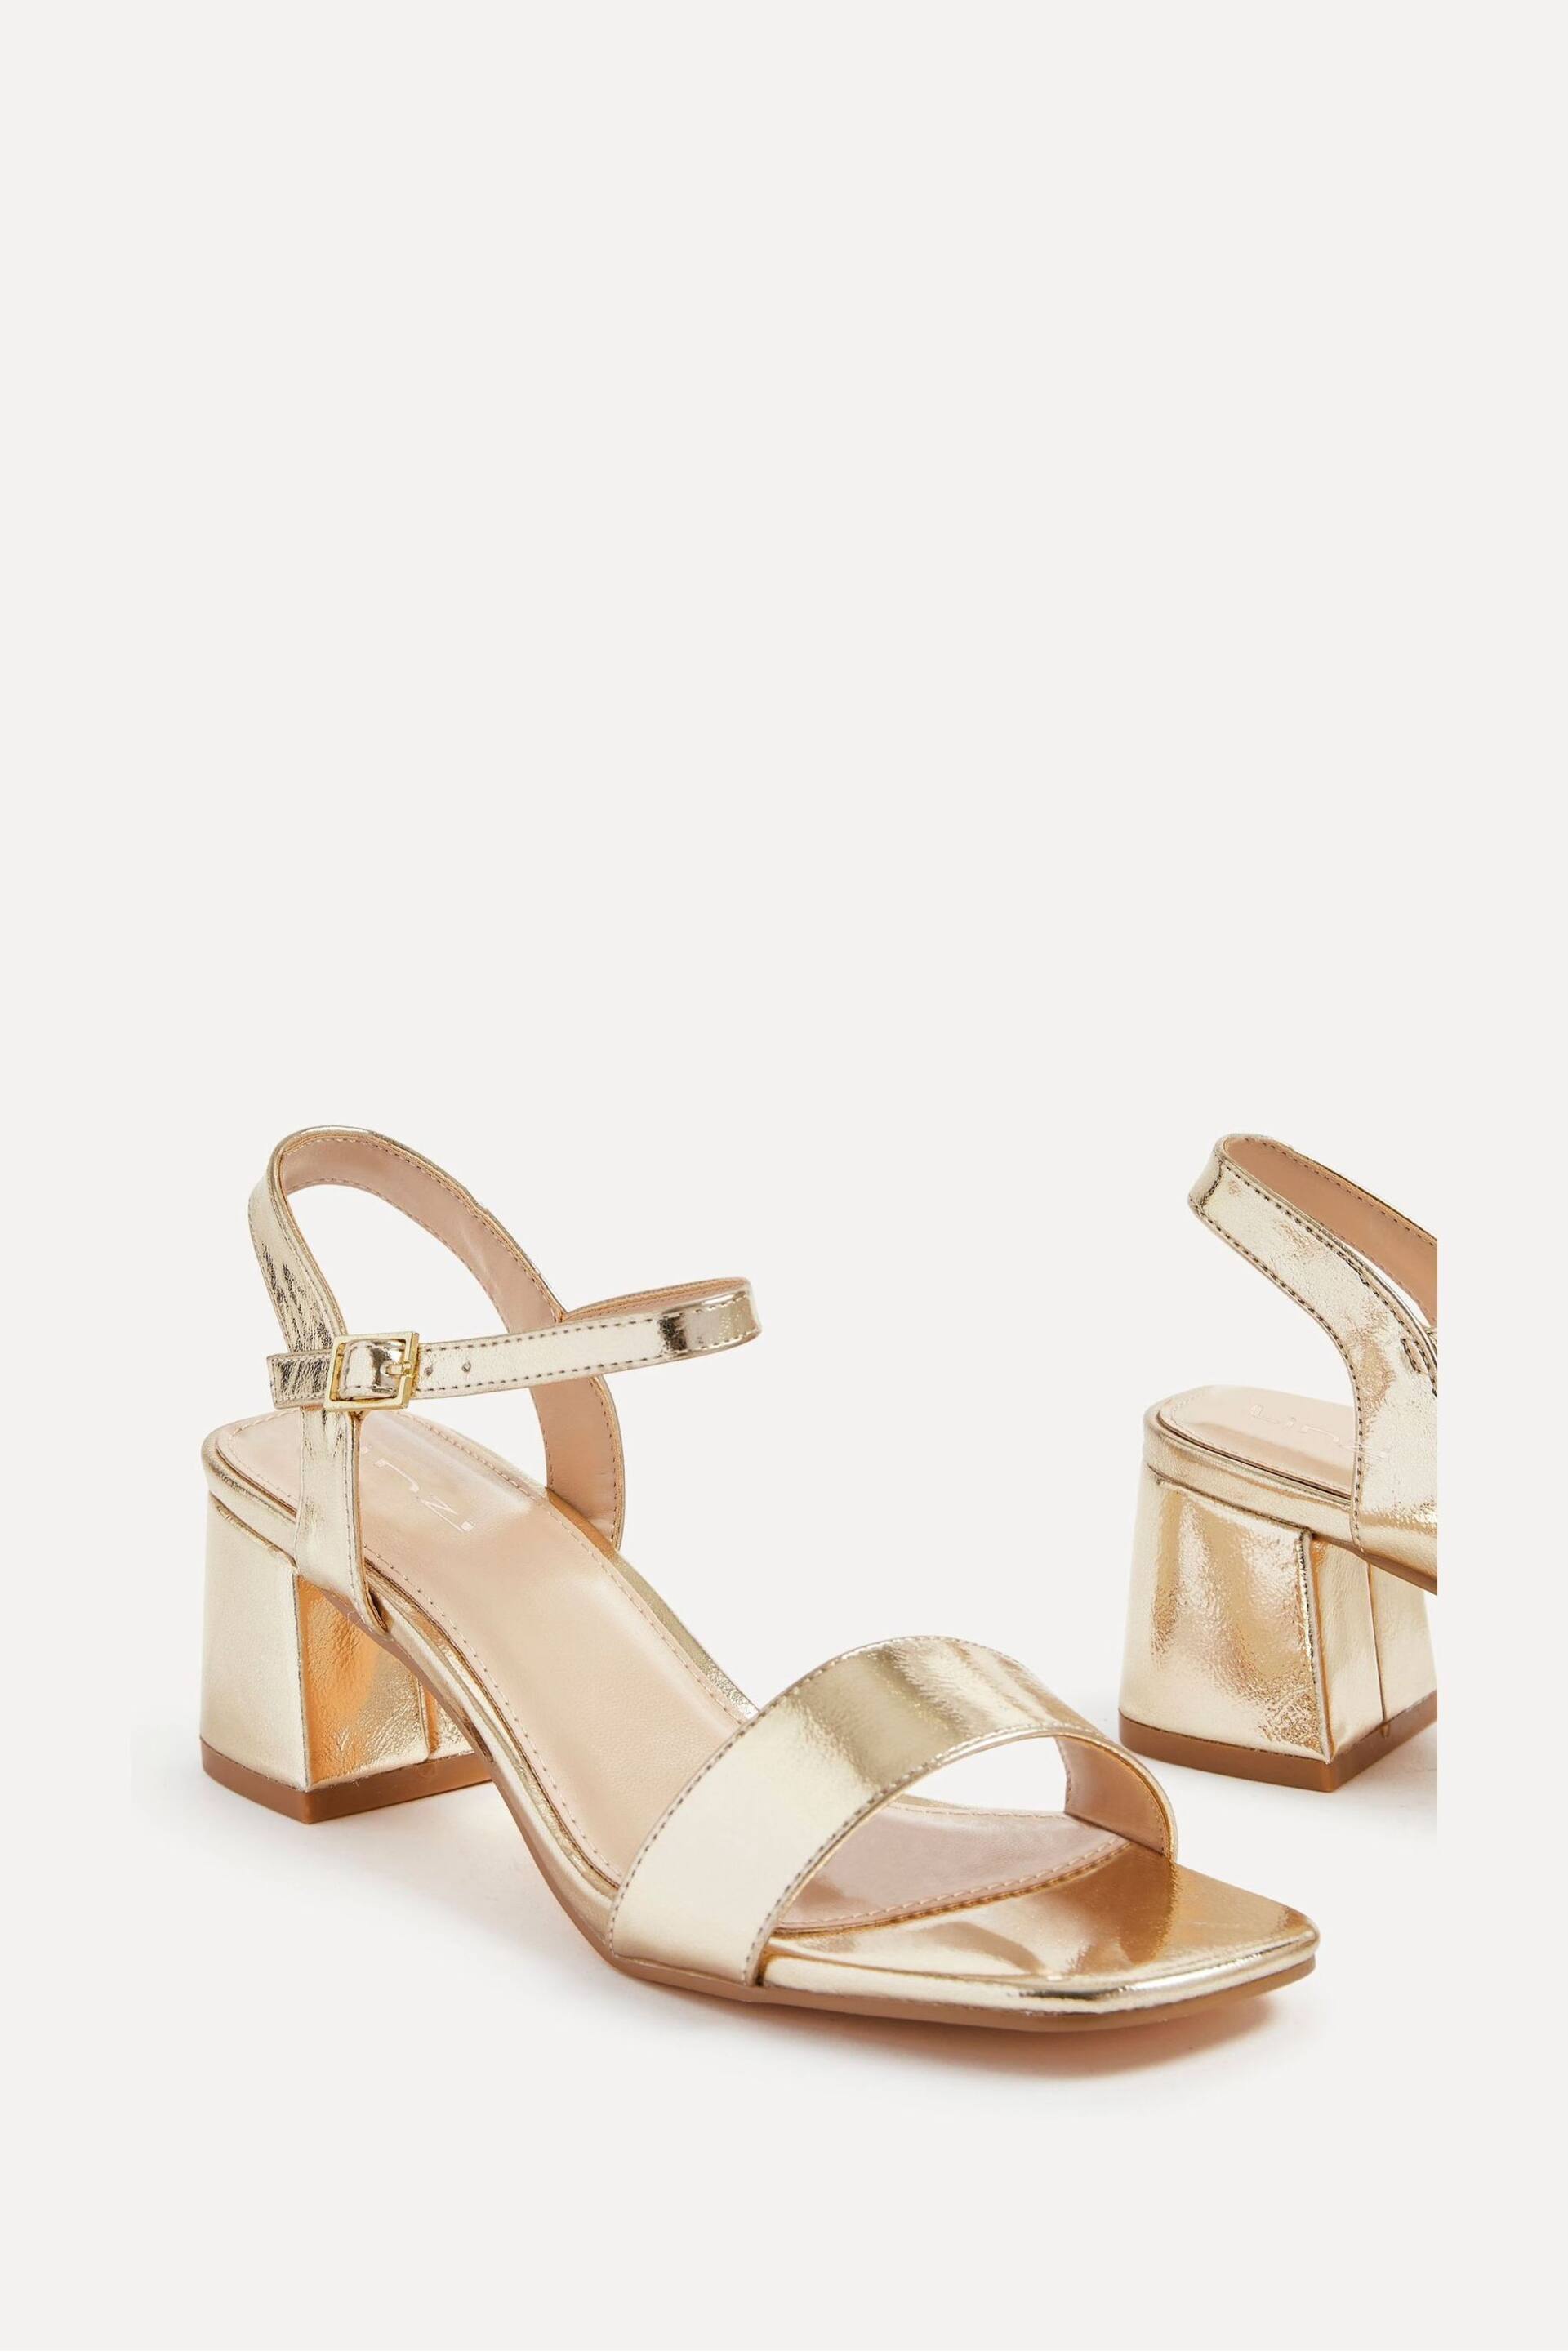 Linzi Gold Darcie Barely There Block Heeled Sandals - Image 4 of 5